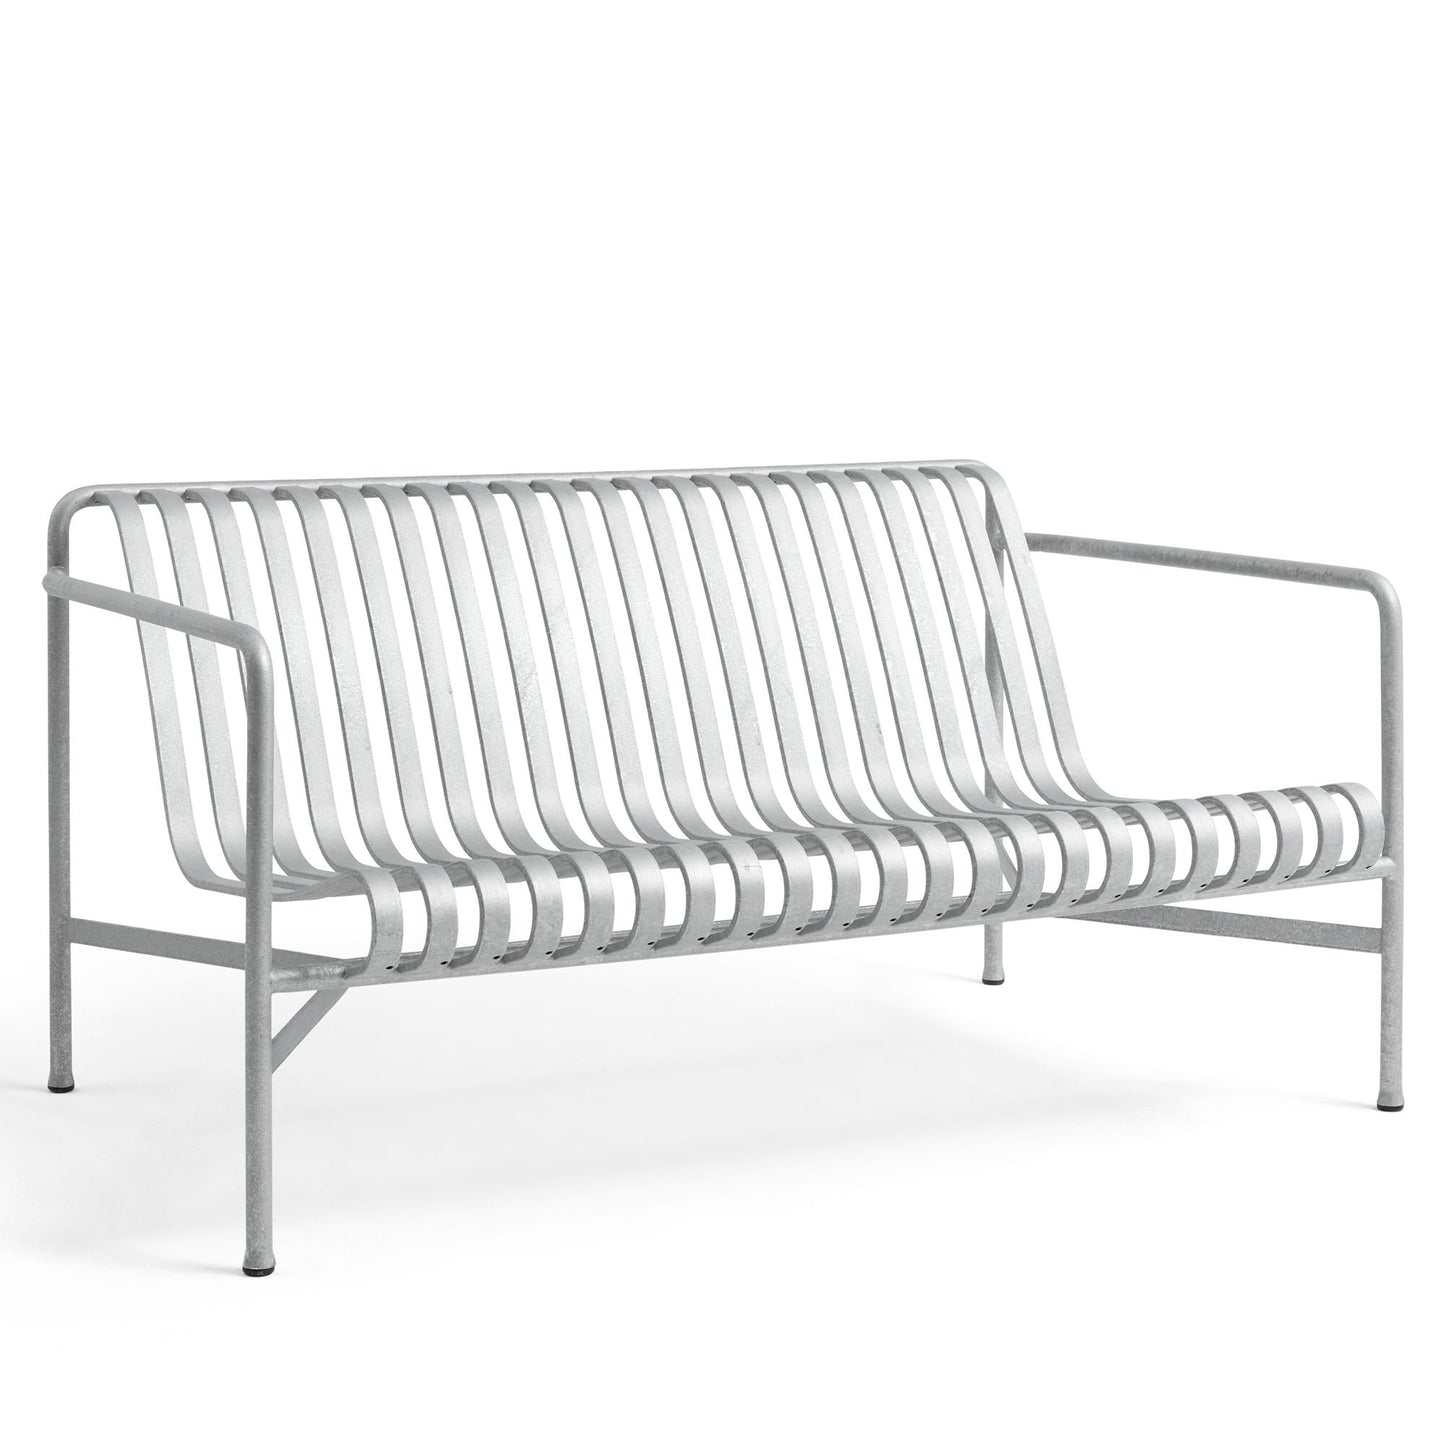 Palissade Lounge Sofa by HAY #Hot Galvanized Steel